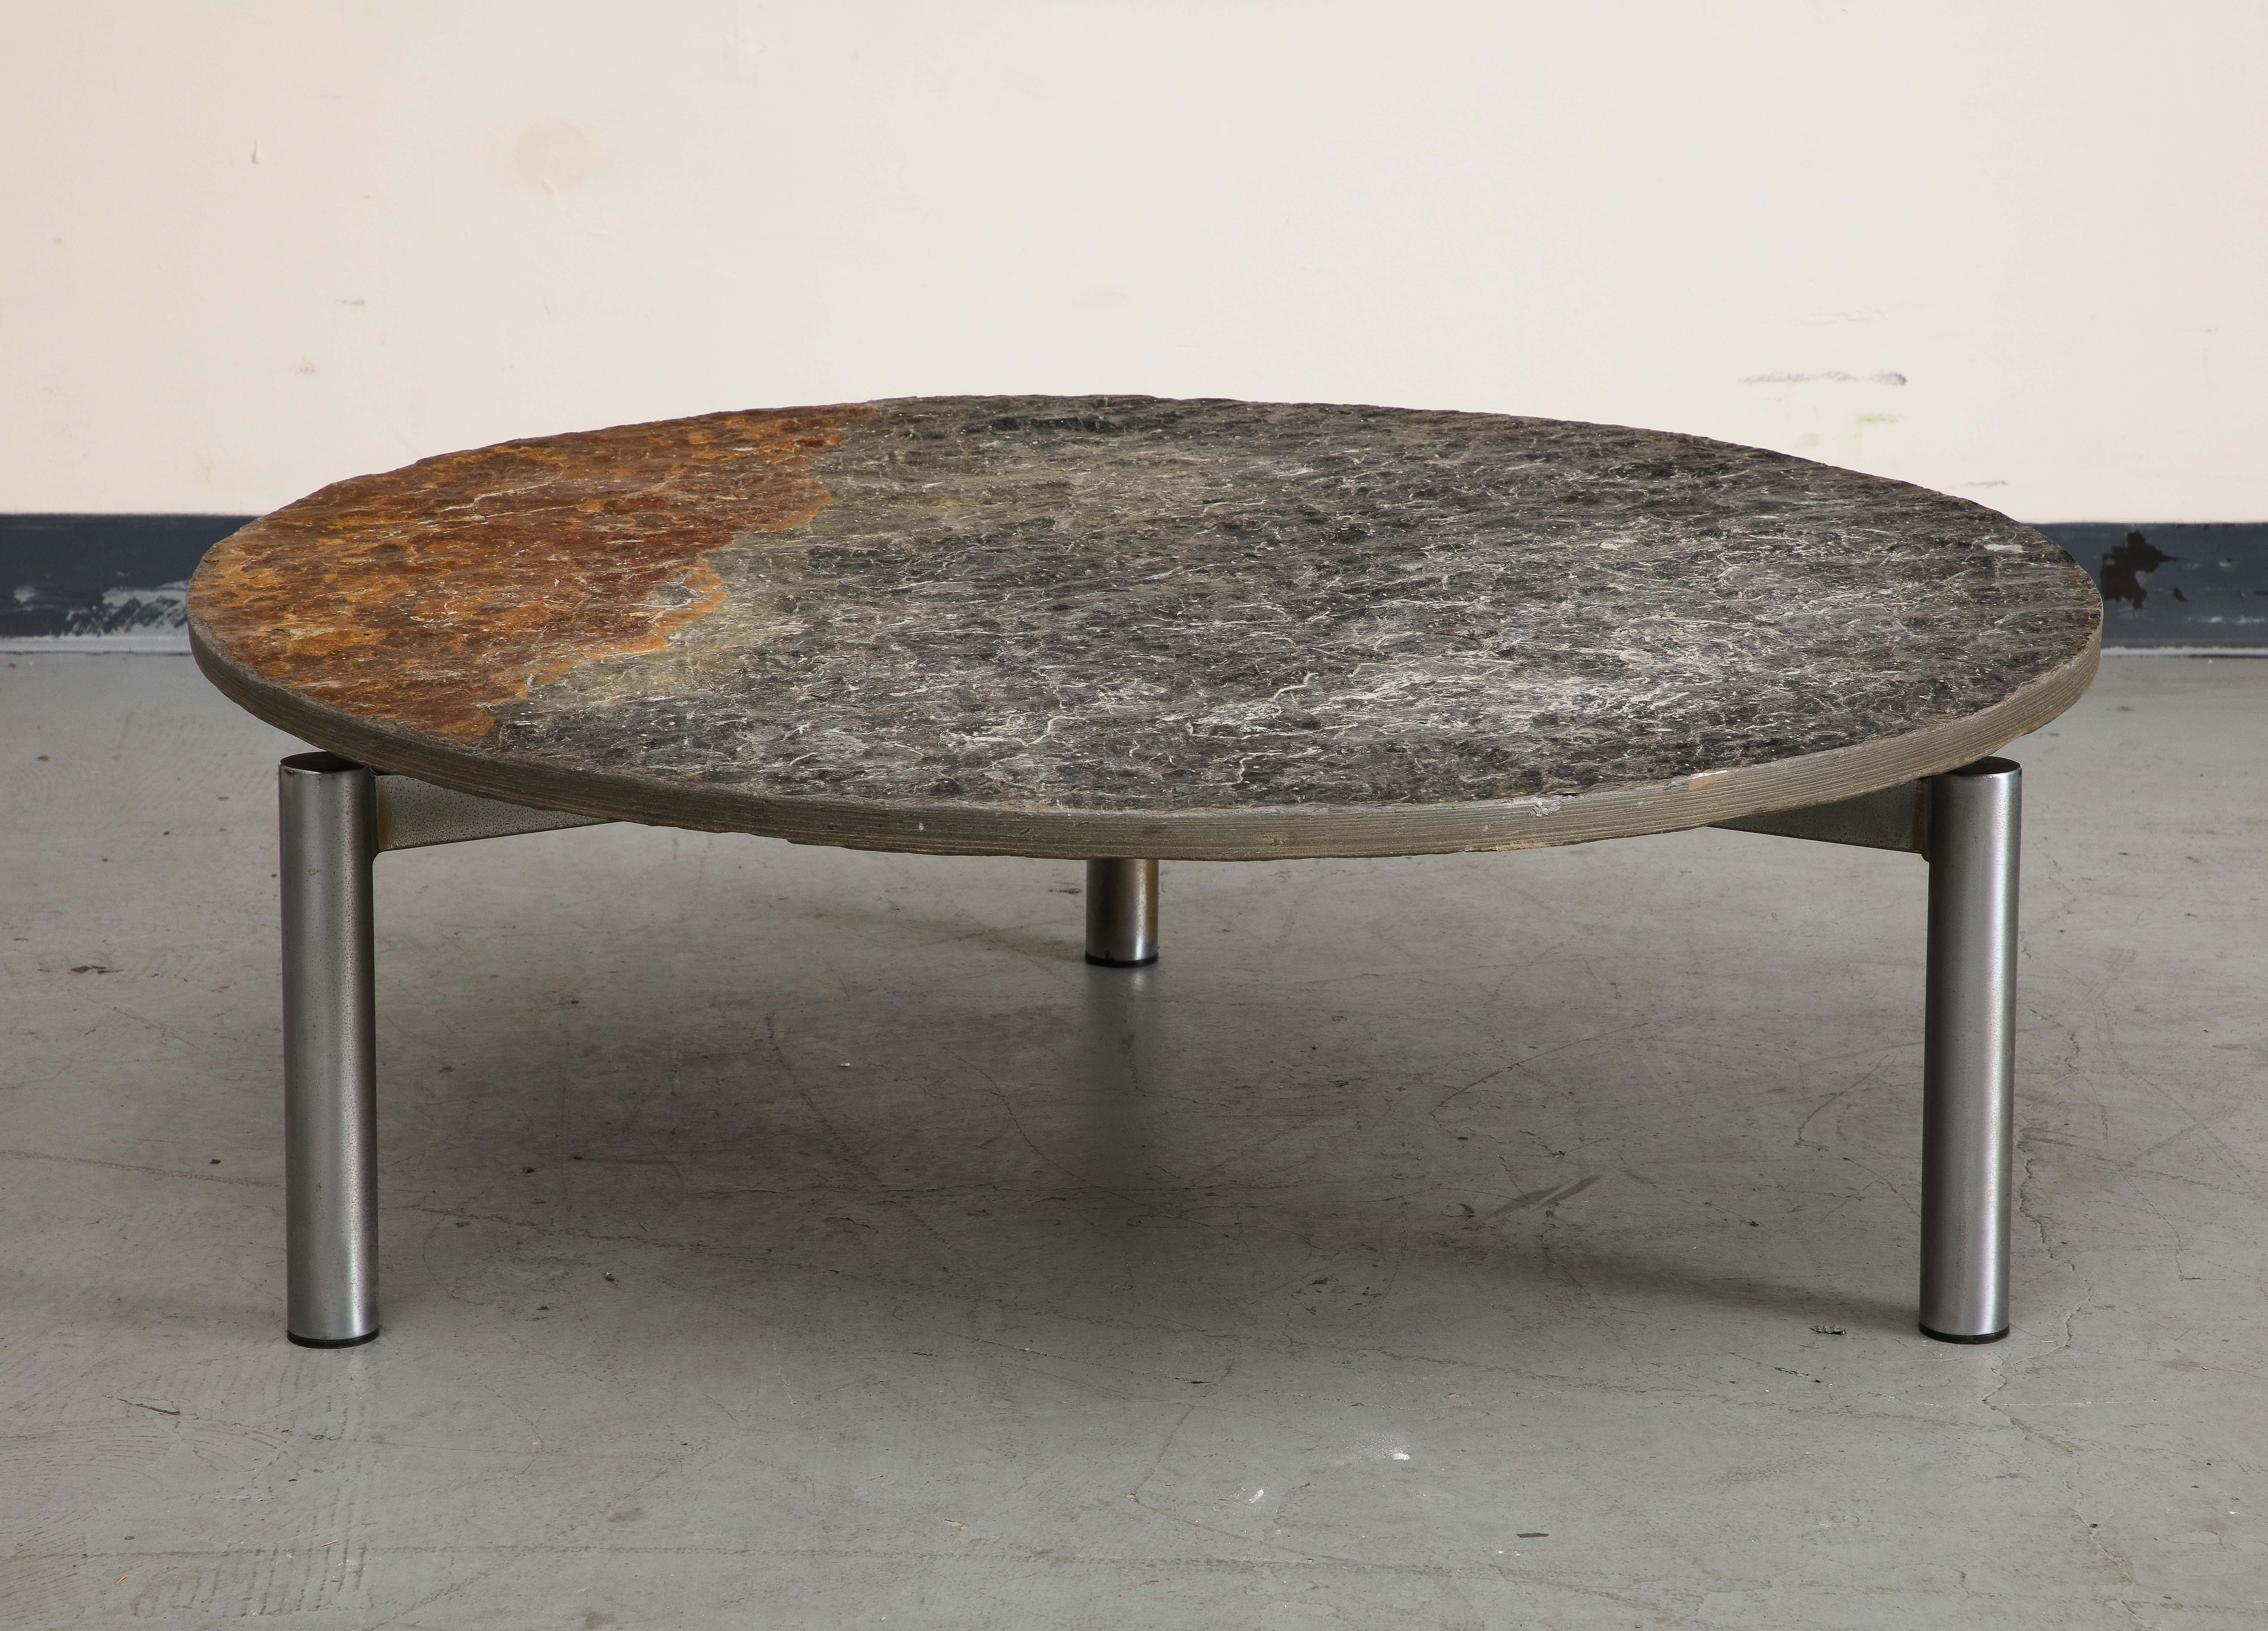 French midcentury coffee table with chrome-plated steel base. Three cylindrical steel legs support the round natural slate top, which shows oxidation. 

